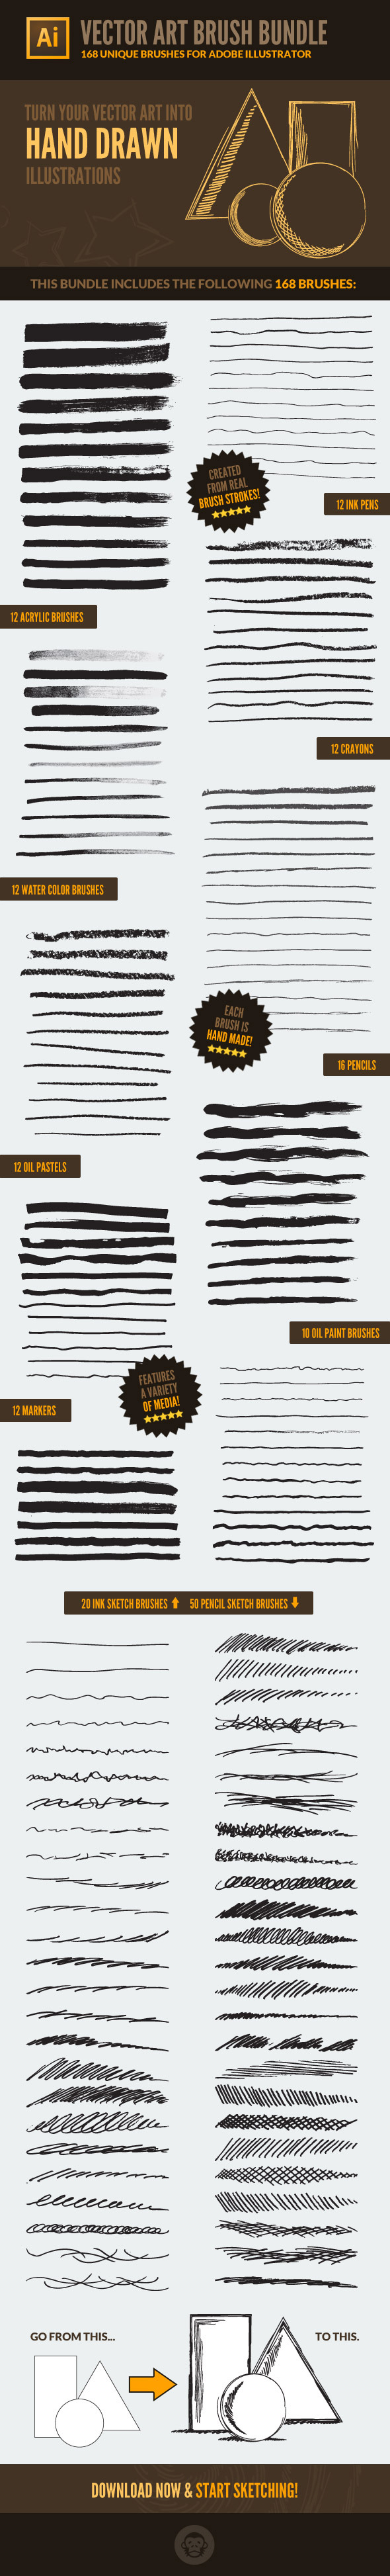 168 Vector Art Brushes - Bundle by GraphicMonkee | GraphicRiver